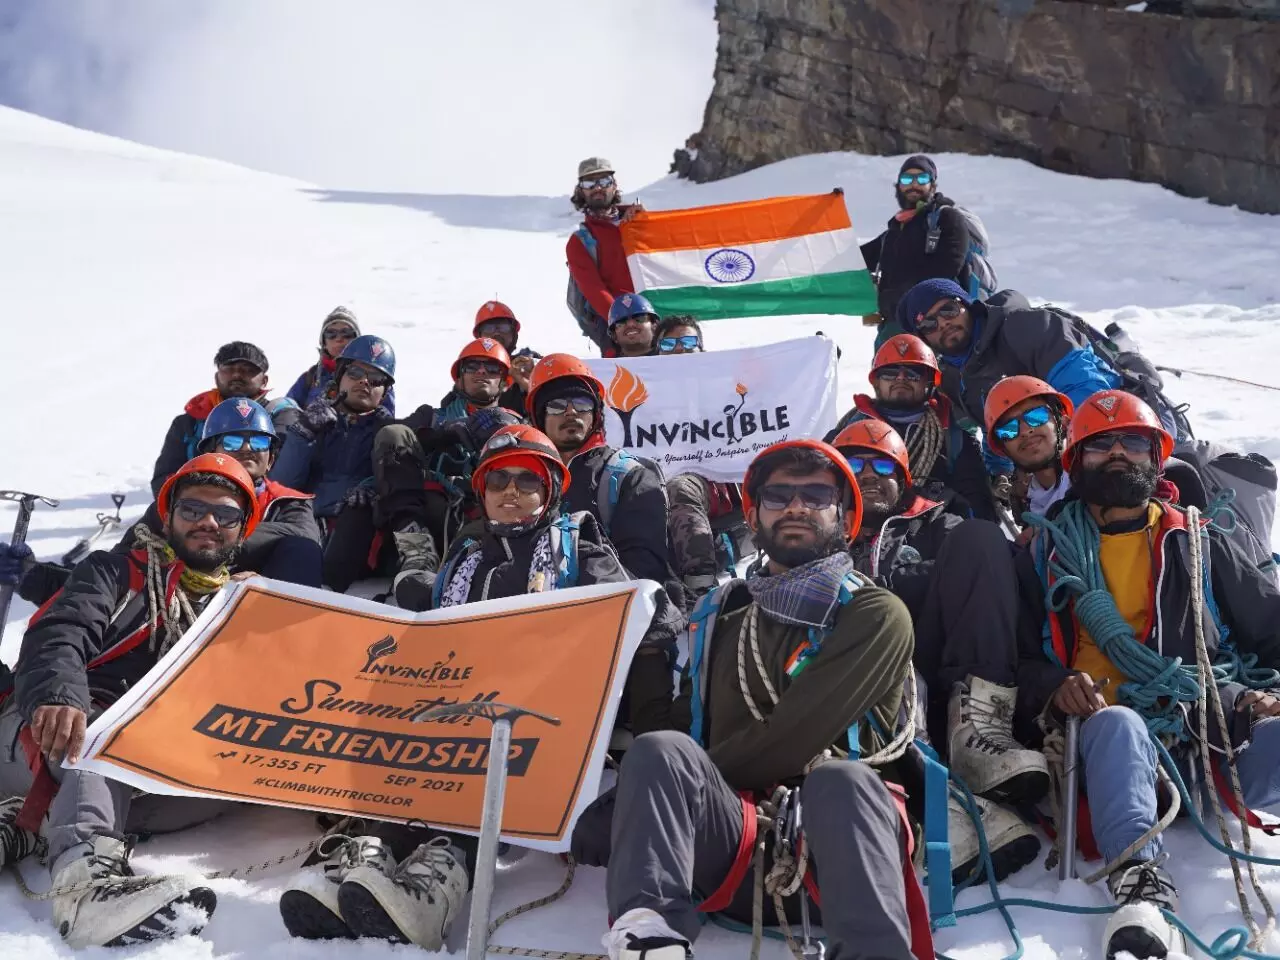 A team of 18 mountaineers, including a youth from Bharuch, climbed the 17,346-foot-high Himachal Mount Friendship Peak.